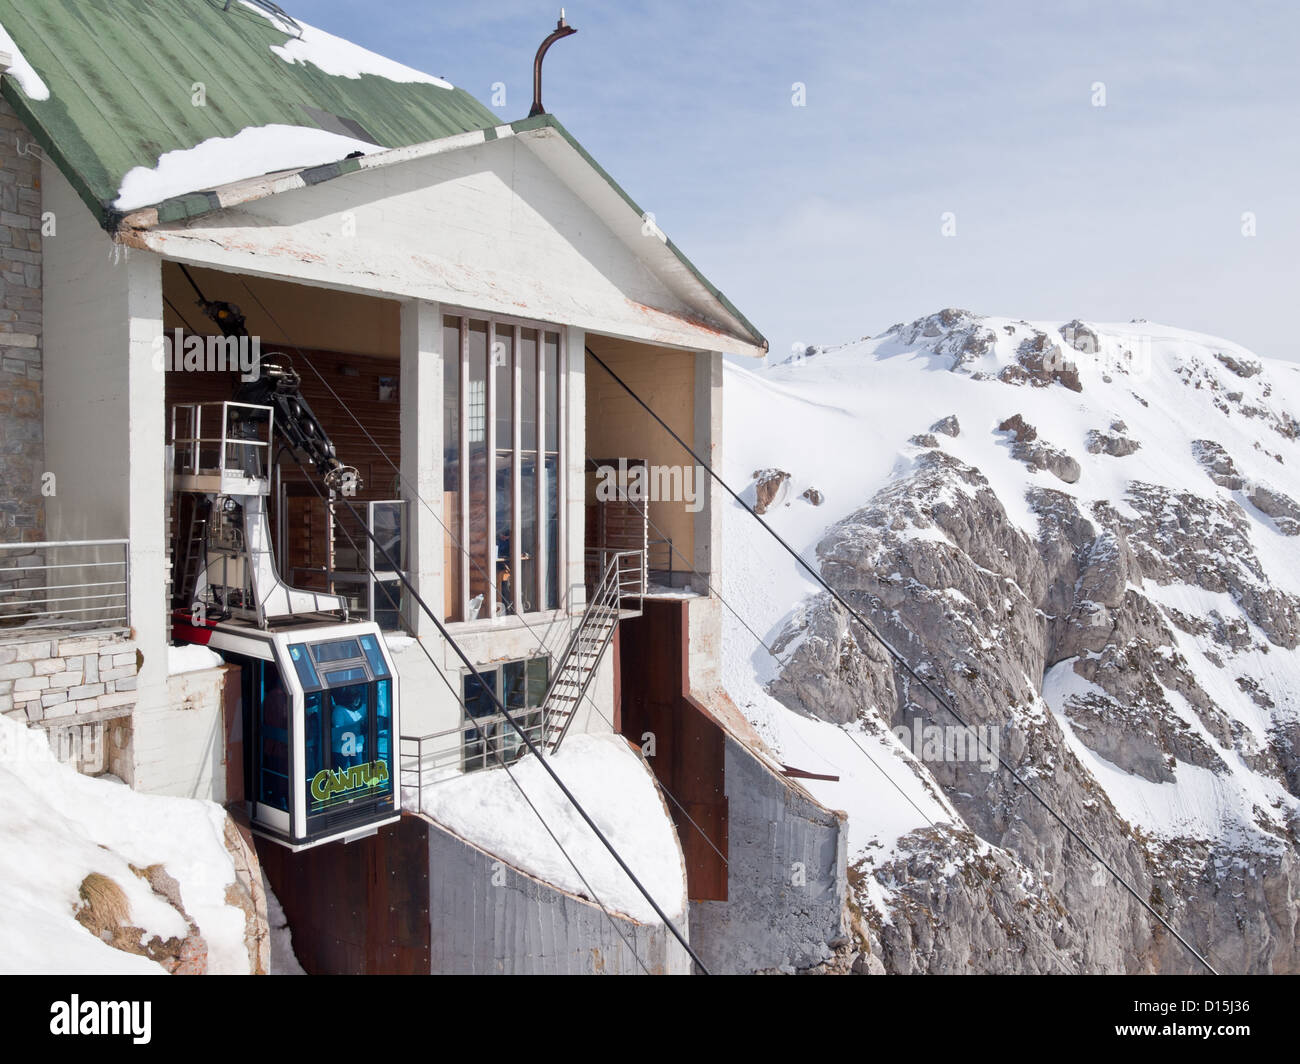 Cableway of Fuente De takes you 750 meters up in the Picos de Europa National Park. El Cable station in the image Stock Photo